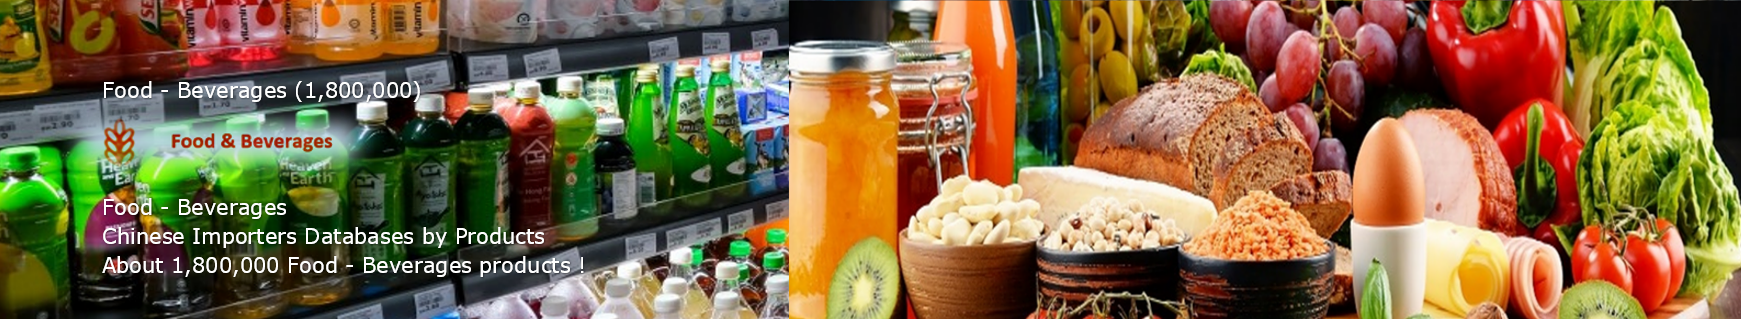 Chinese-importers-databases-by-products-food-beverages